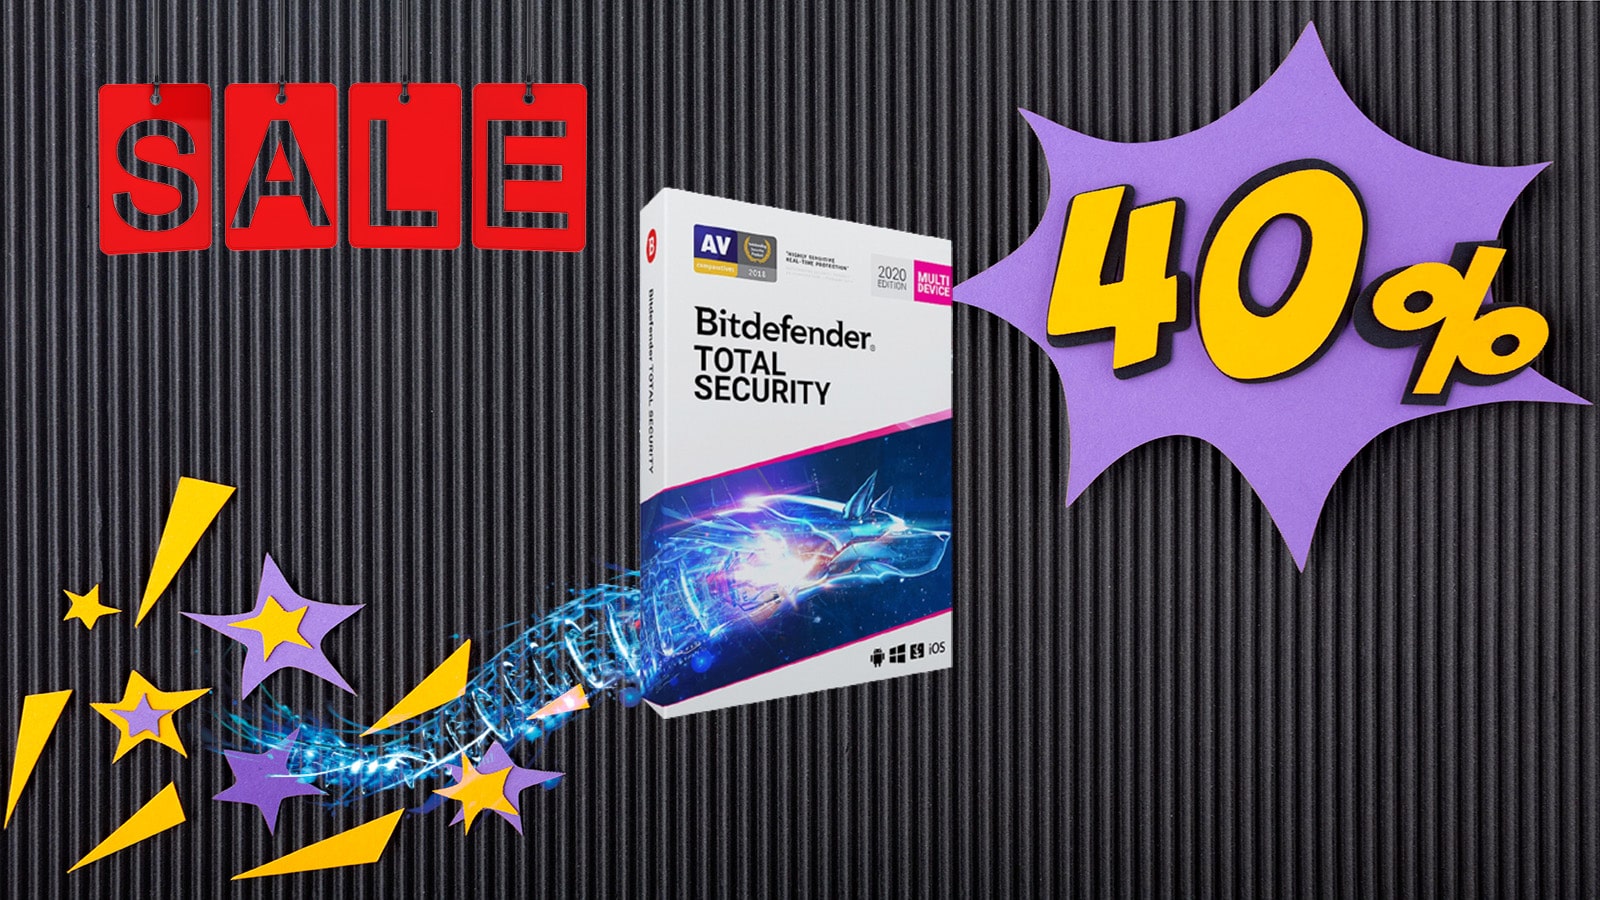 Buy Bitdefender Total Security with 40% Discount at the Lowest Price